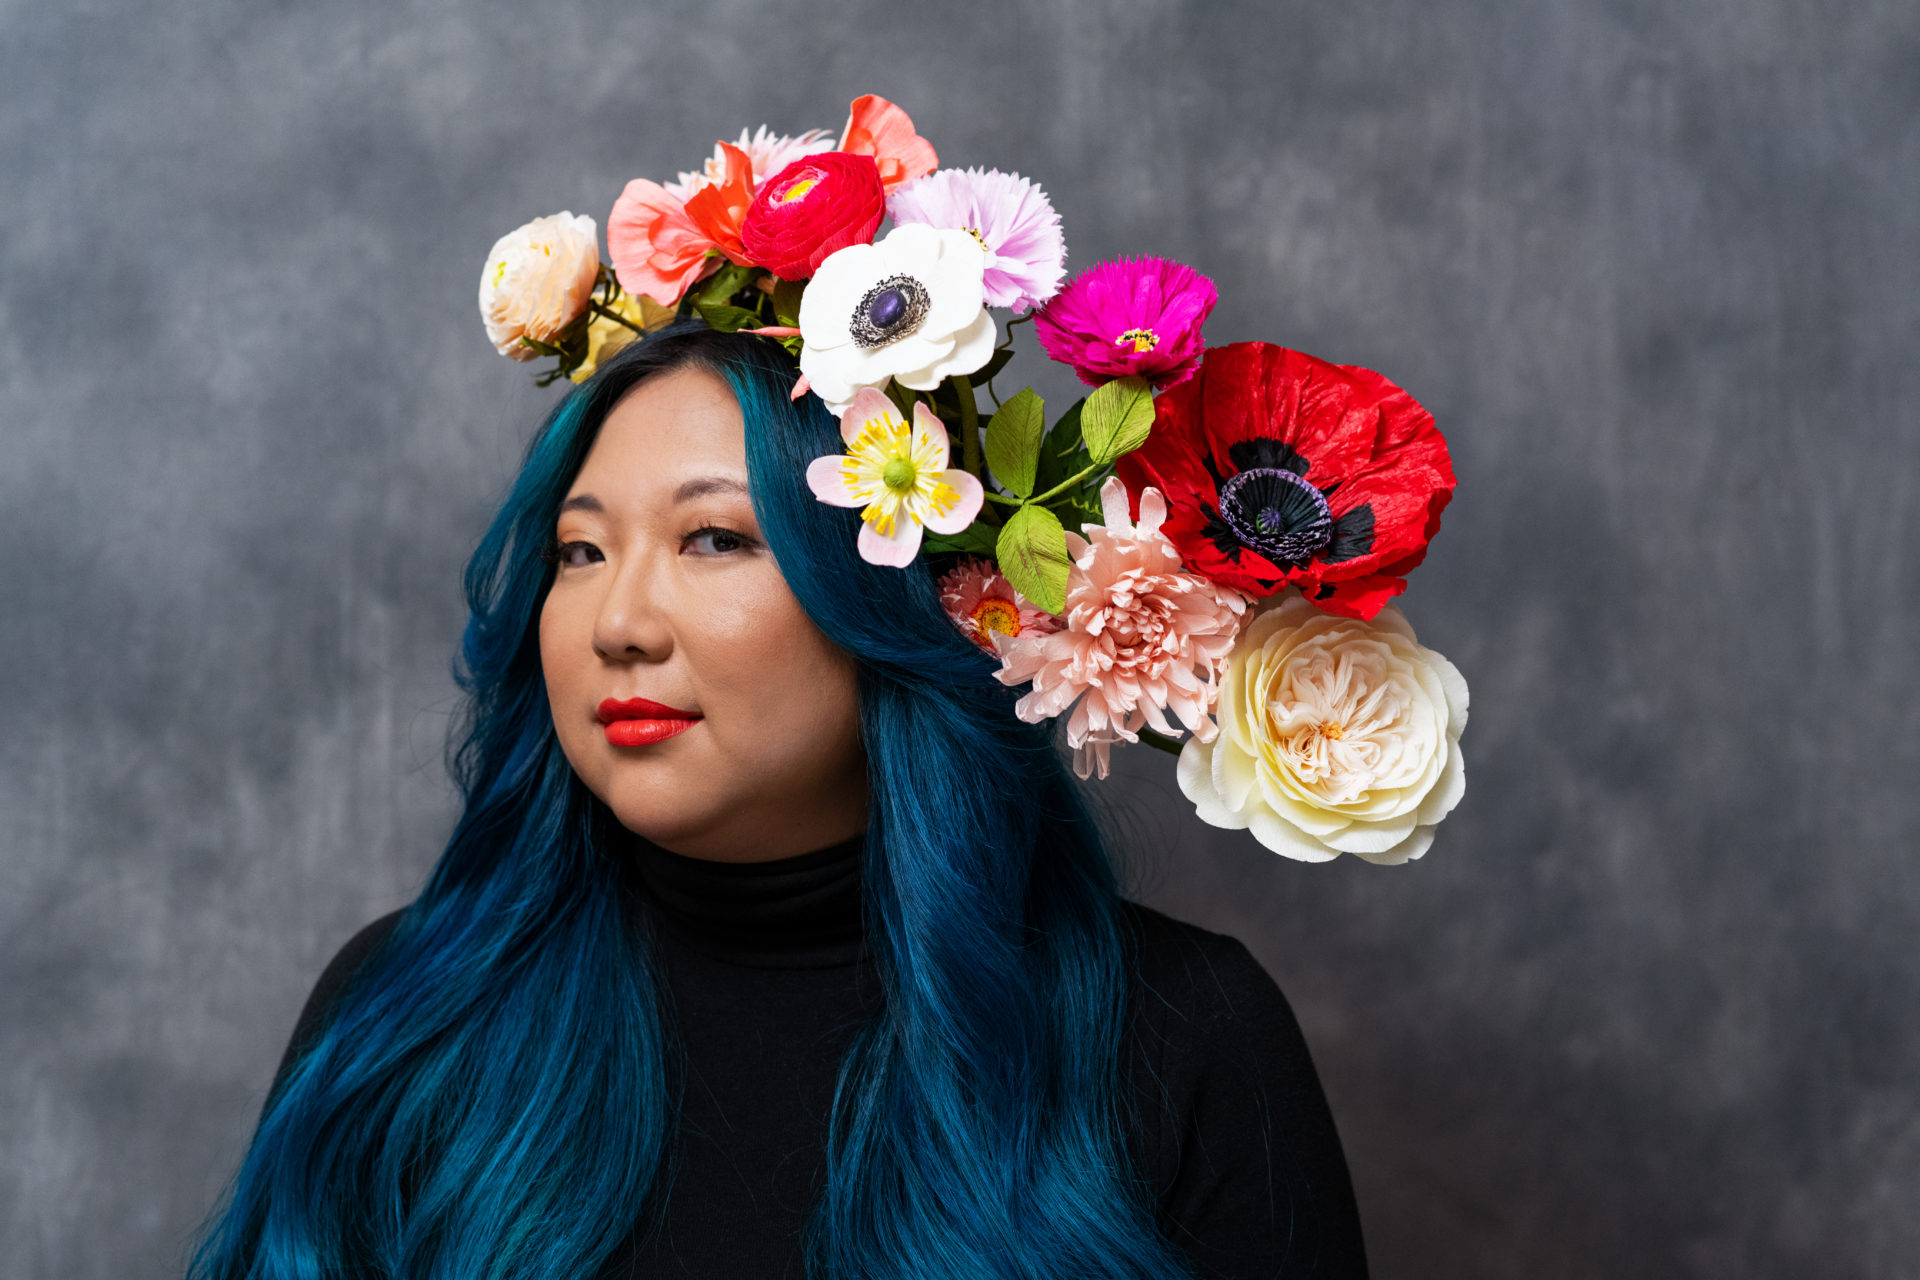 A woman with long vibrant blue hair models a head piece made of many colorful paper flowers.